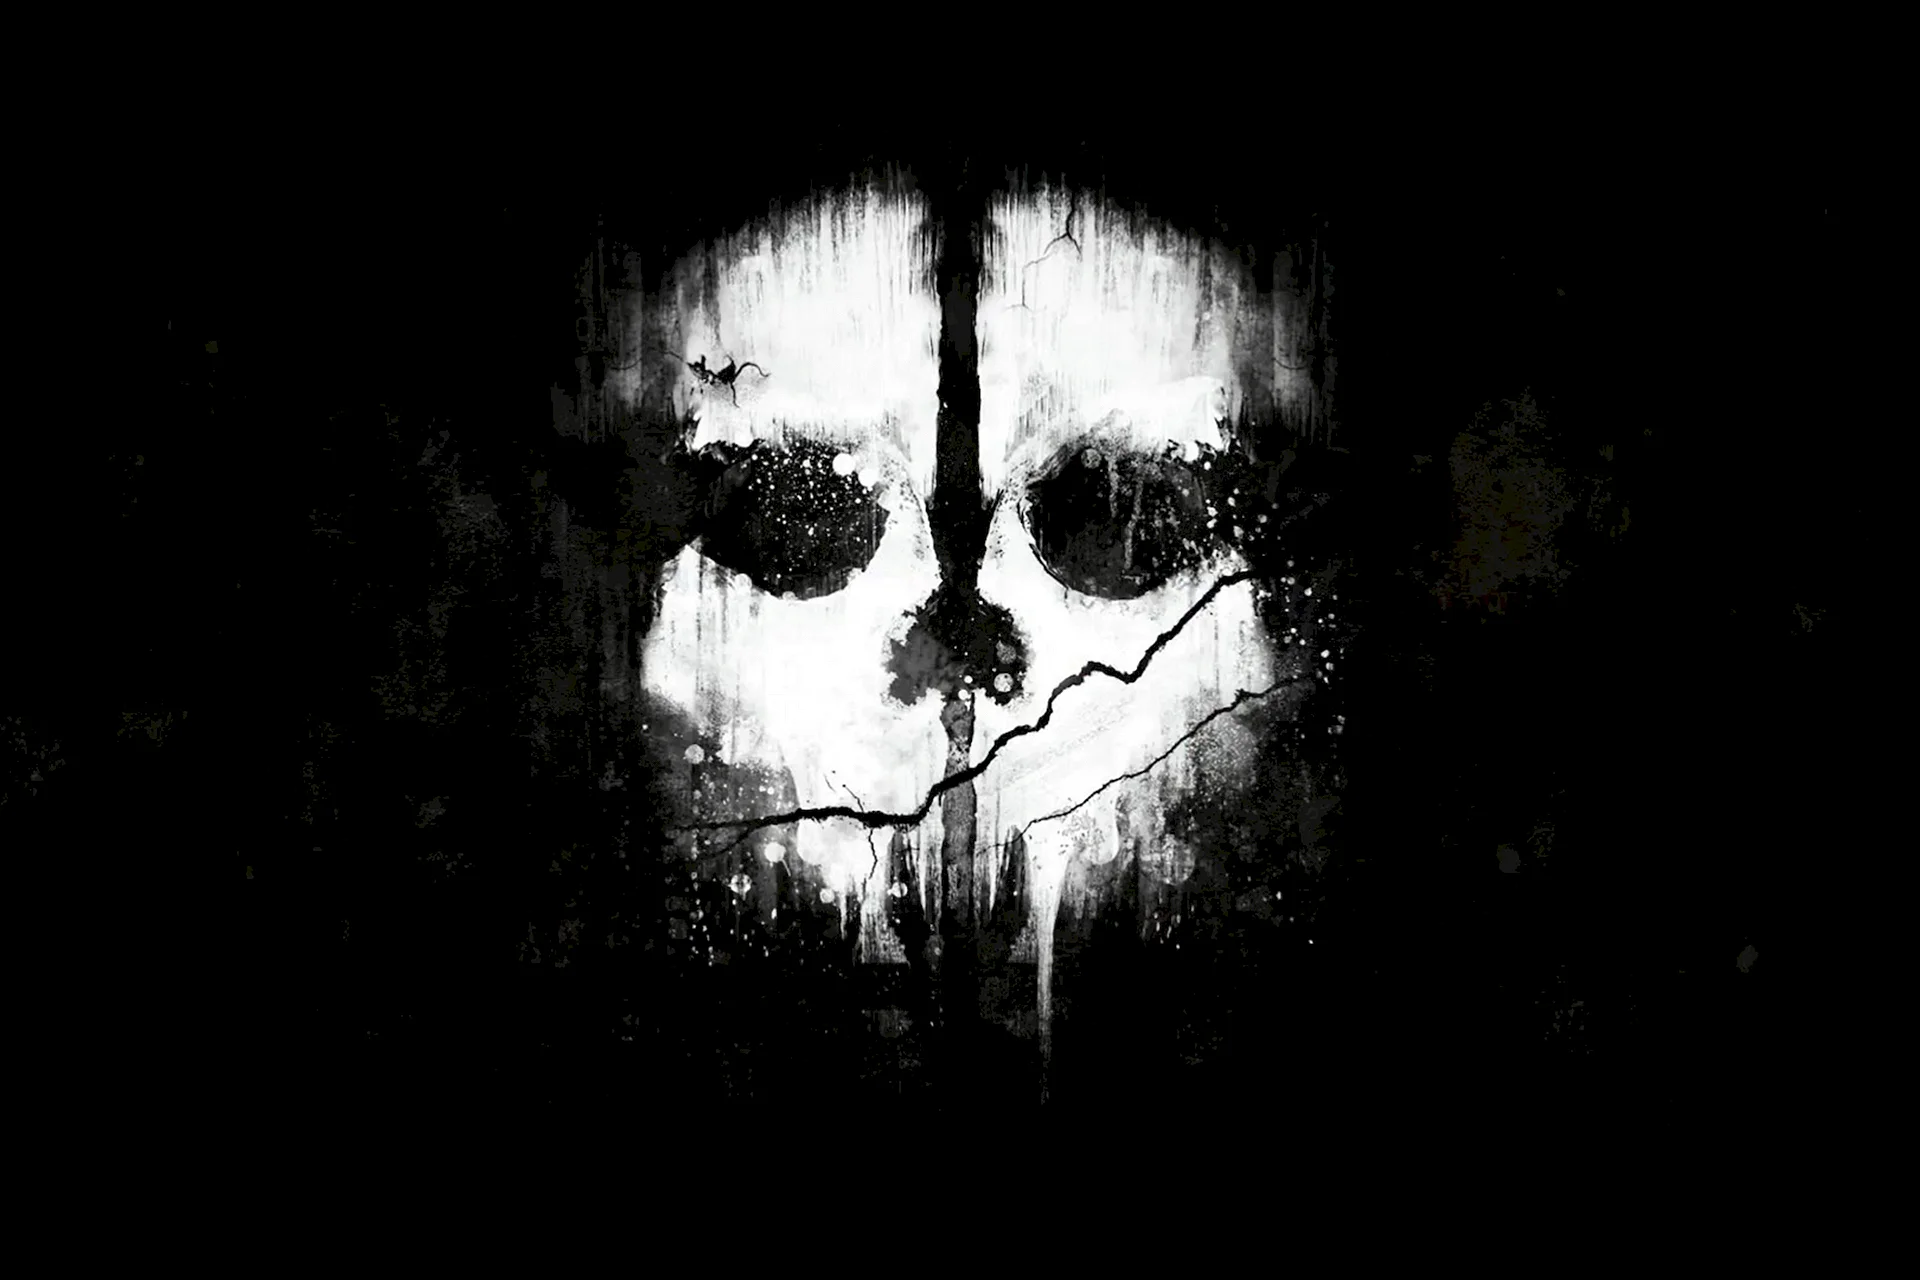 Ghost Call Of Duty Wallpaper